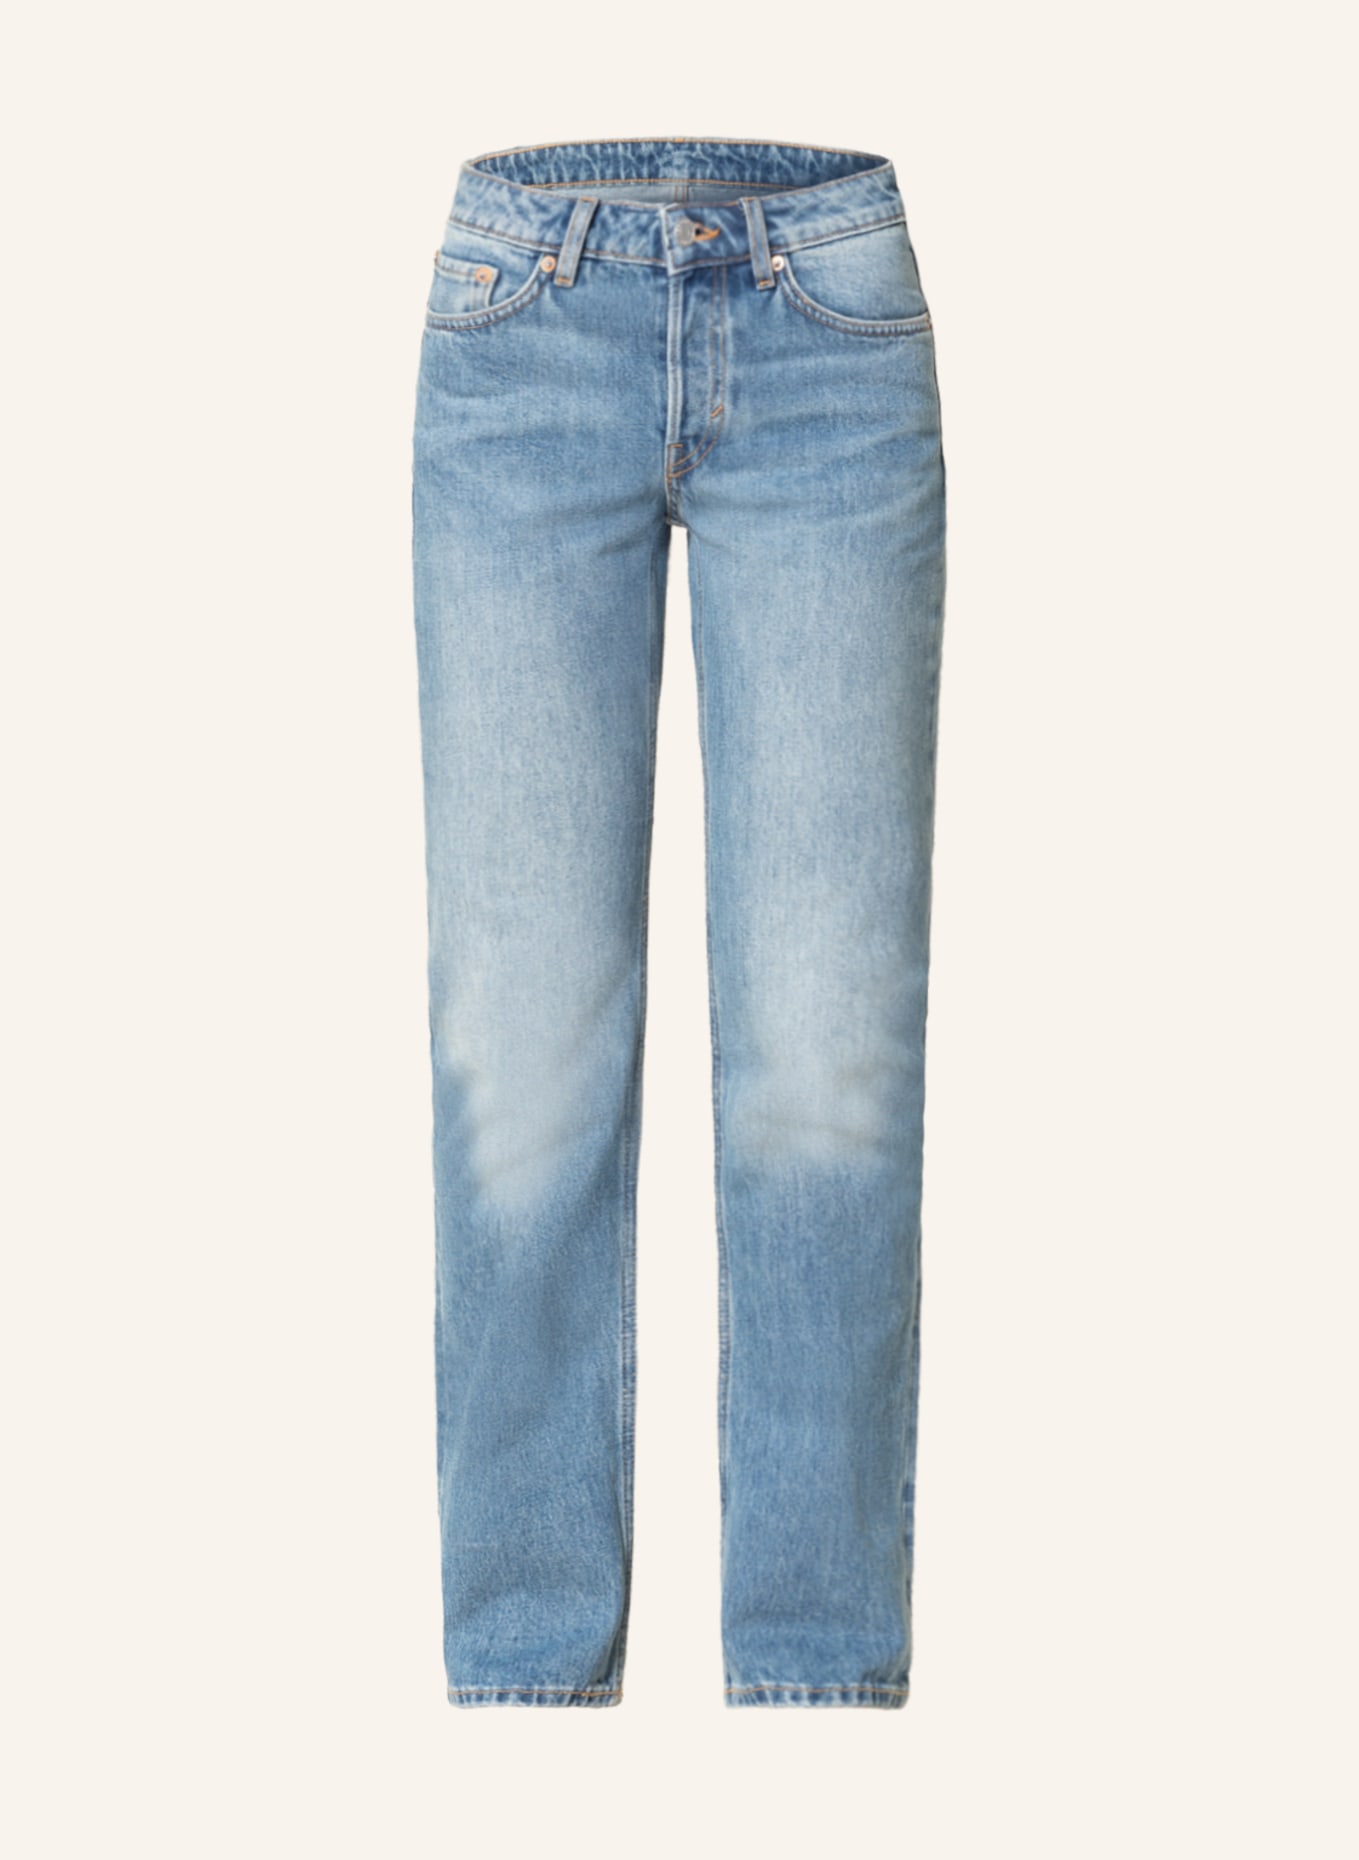 WEEKDAY Straight jeans, Color: Blue Medium dusty (Image 1)